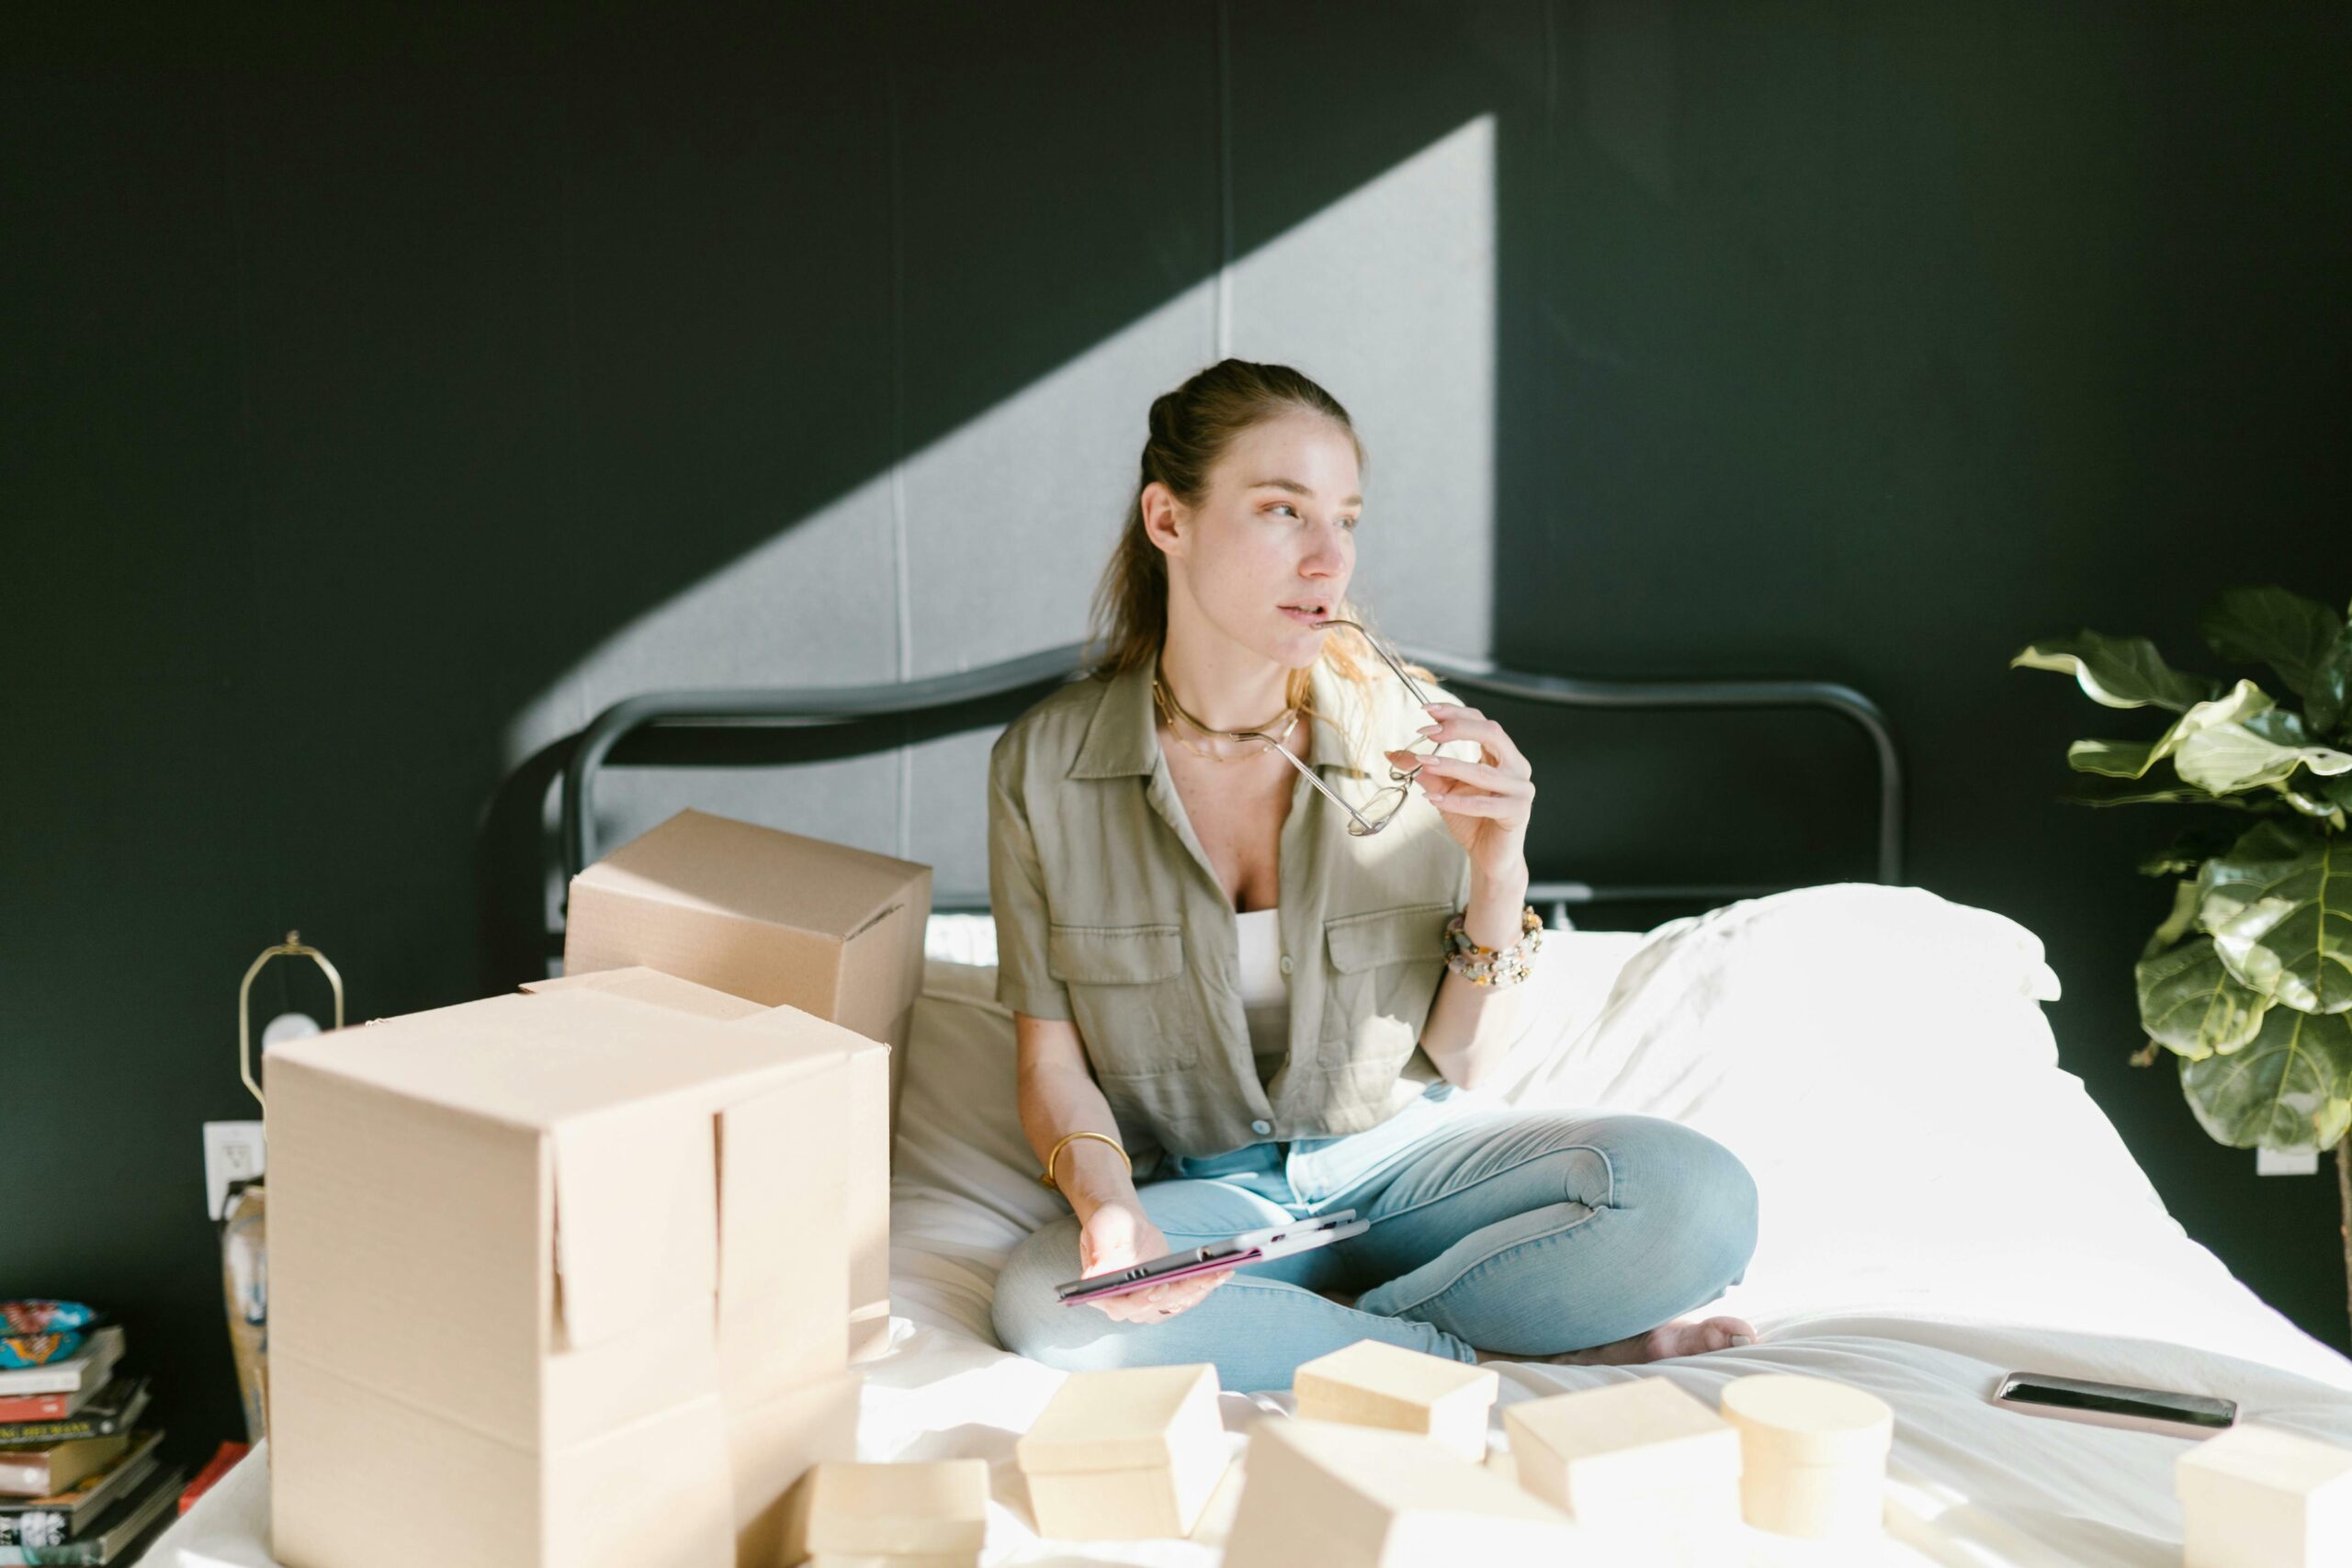 Woman surrounded by boxes on bed